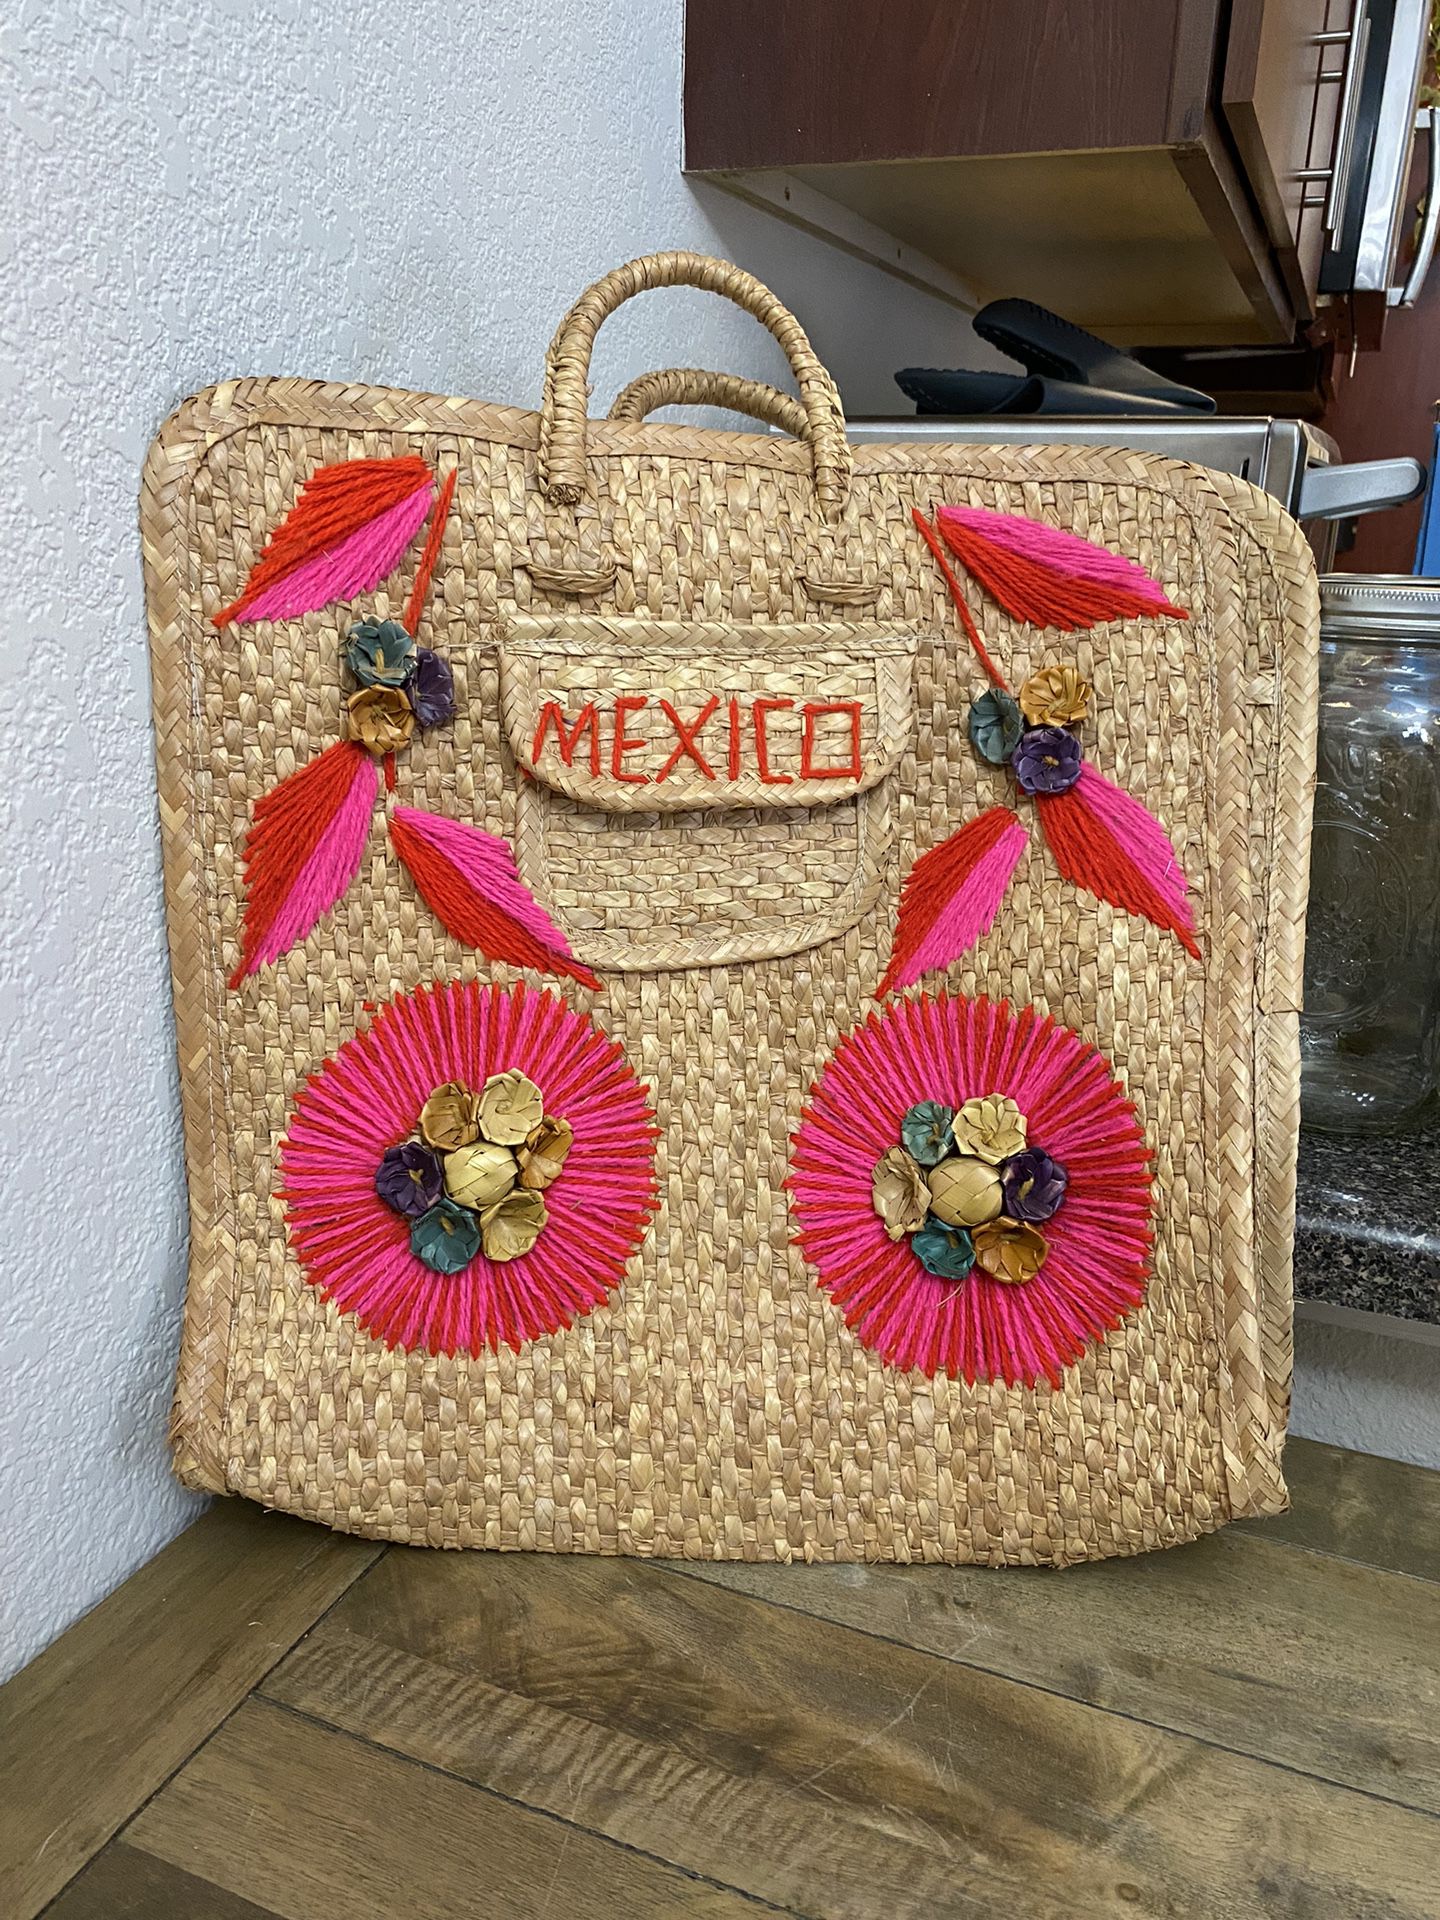 Vintage 1965 Woven Straw beach Bag From Mexico